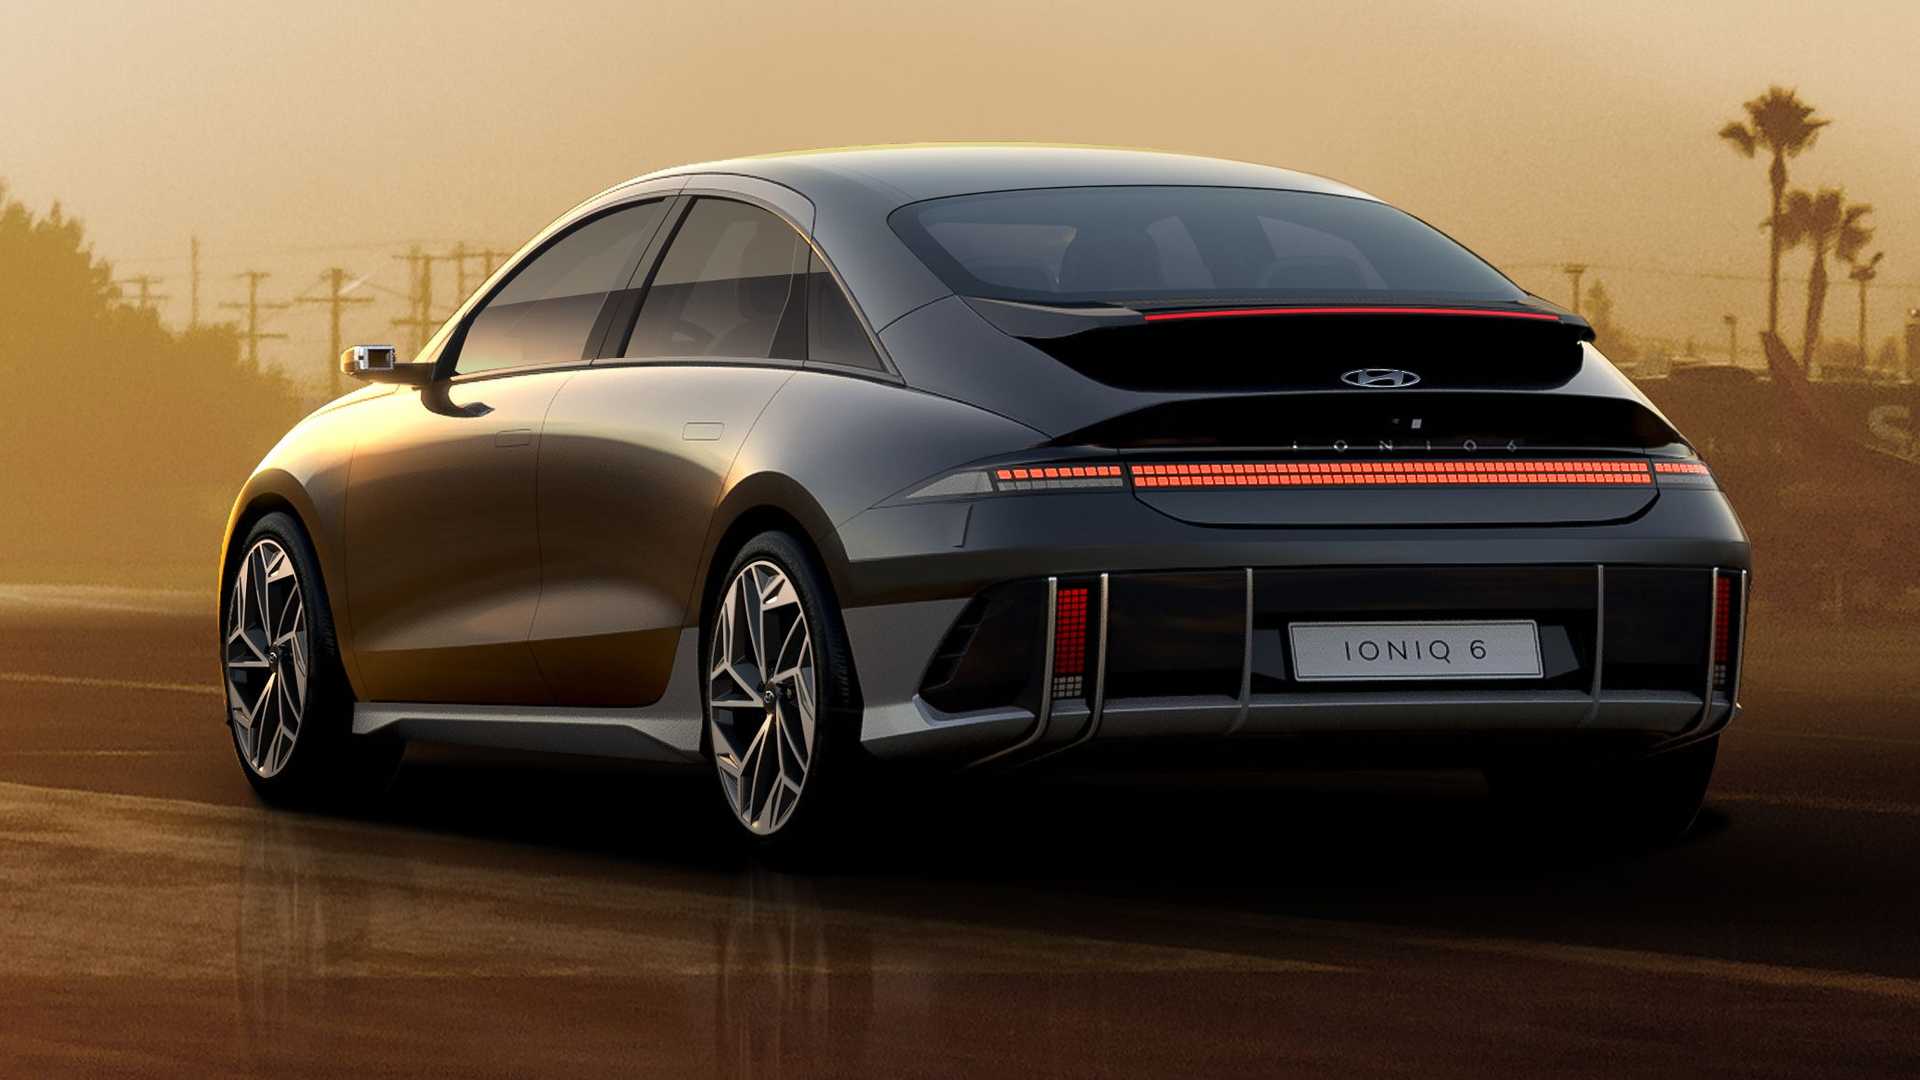 Today, we are covering the upcoming 2024 Hyundai Ioniq 6, as well as answering the questions 